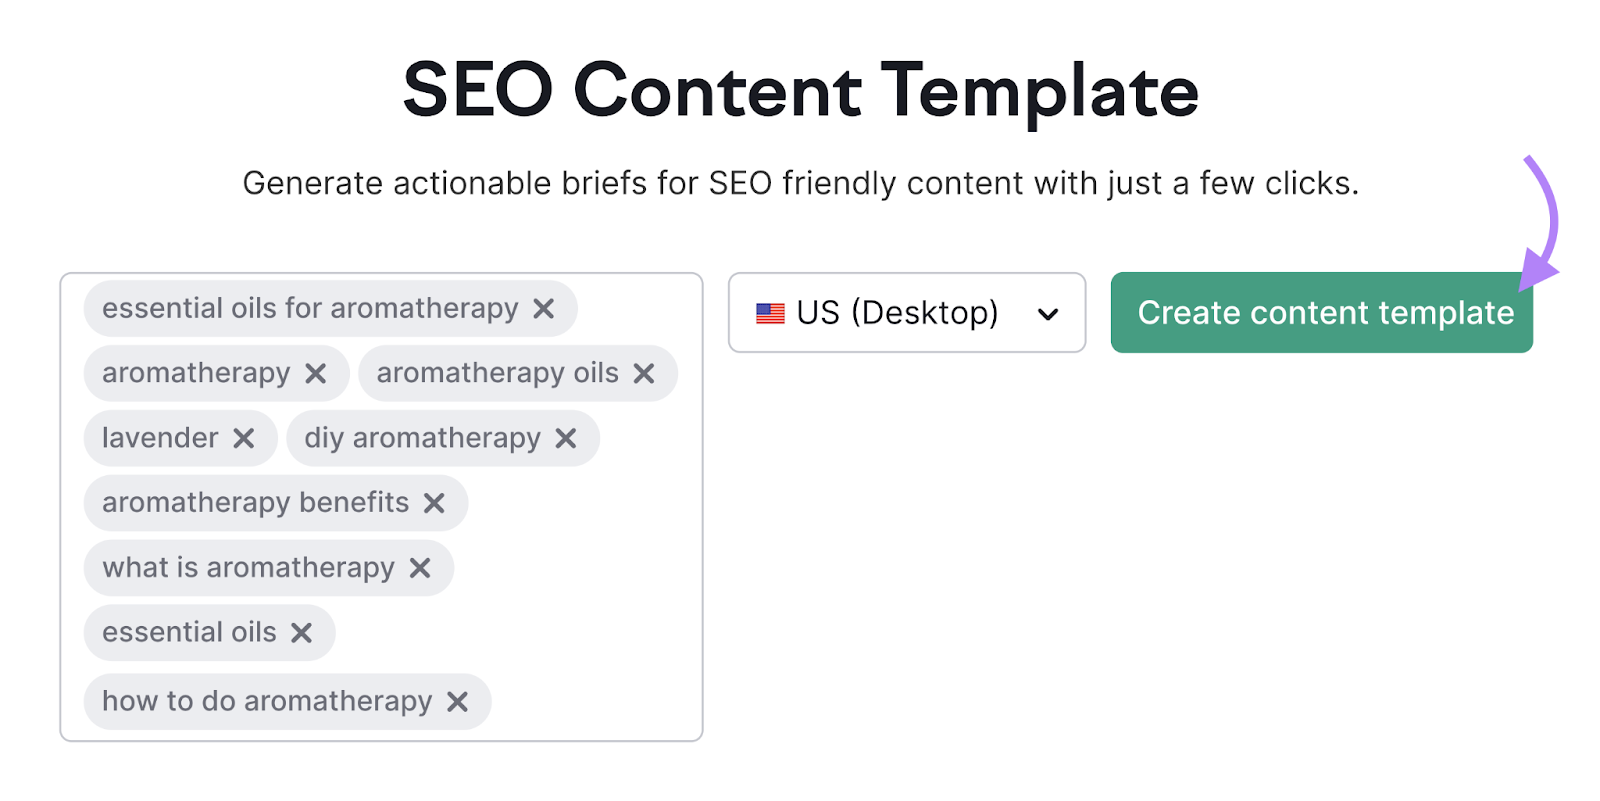 keywords similar  aromatherapy, indispensable  oils, and lavender entered into Semrush's SEO contented  template tool